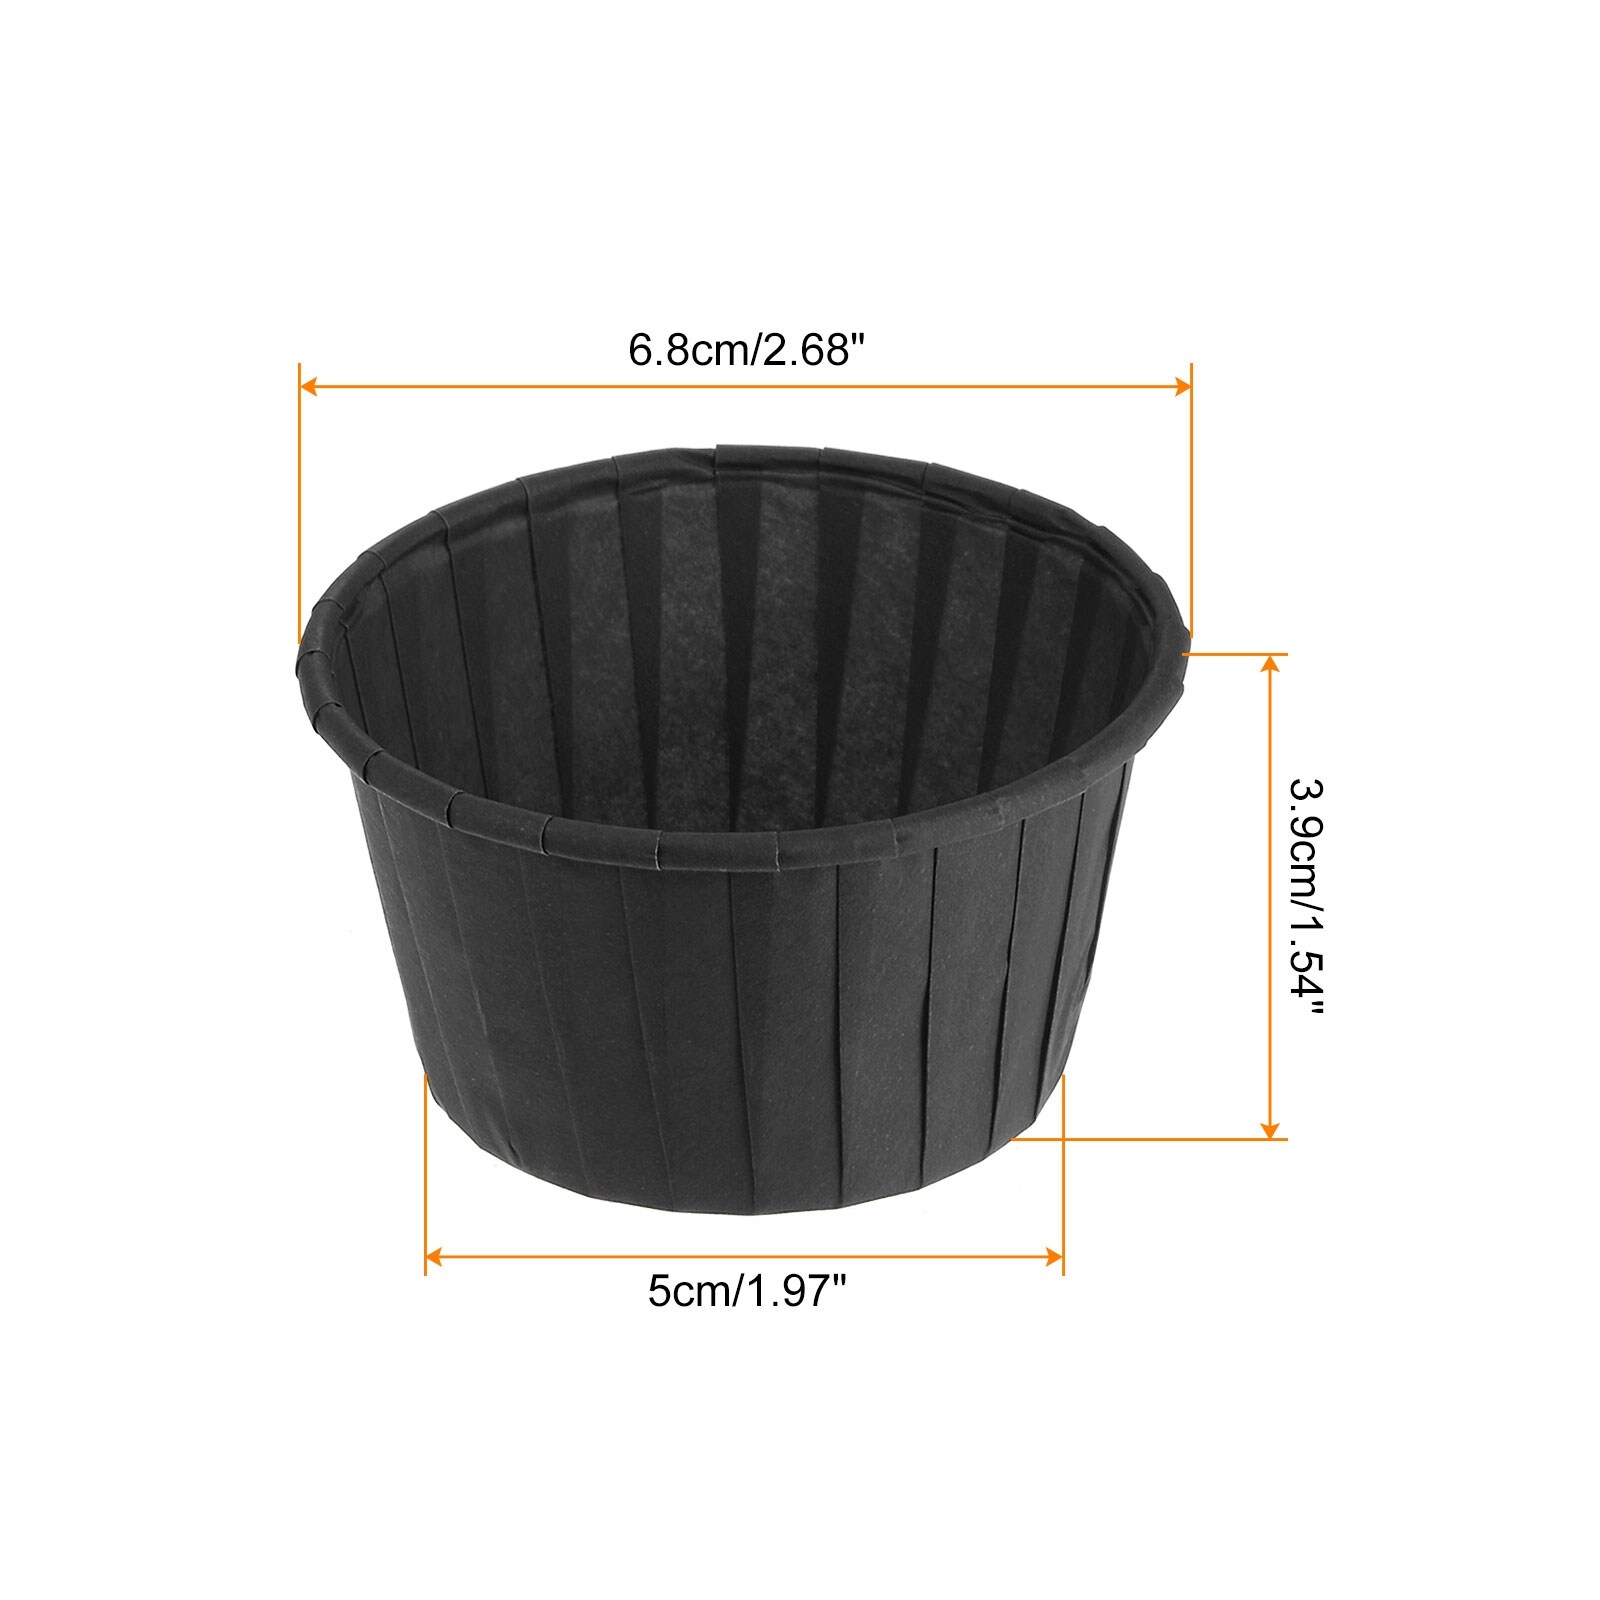 https://ak1.ostkcdn.com/images/products/is/images/direct/3afd499adea733391ad84ead8e108d5354f75993/Natural-Cupcake-Baking-Cups%2C-50Pcs-3.5oz-Paper-Cupcake-Liners.jpg